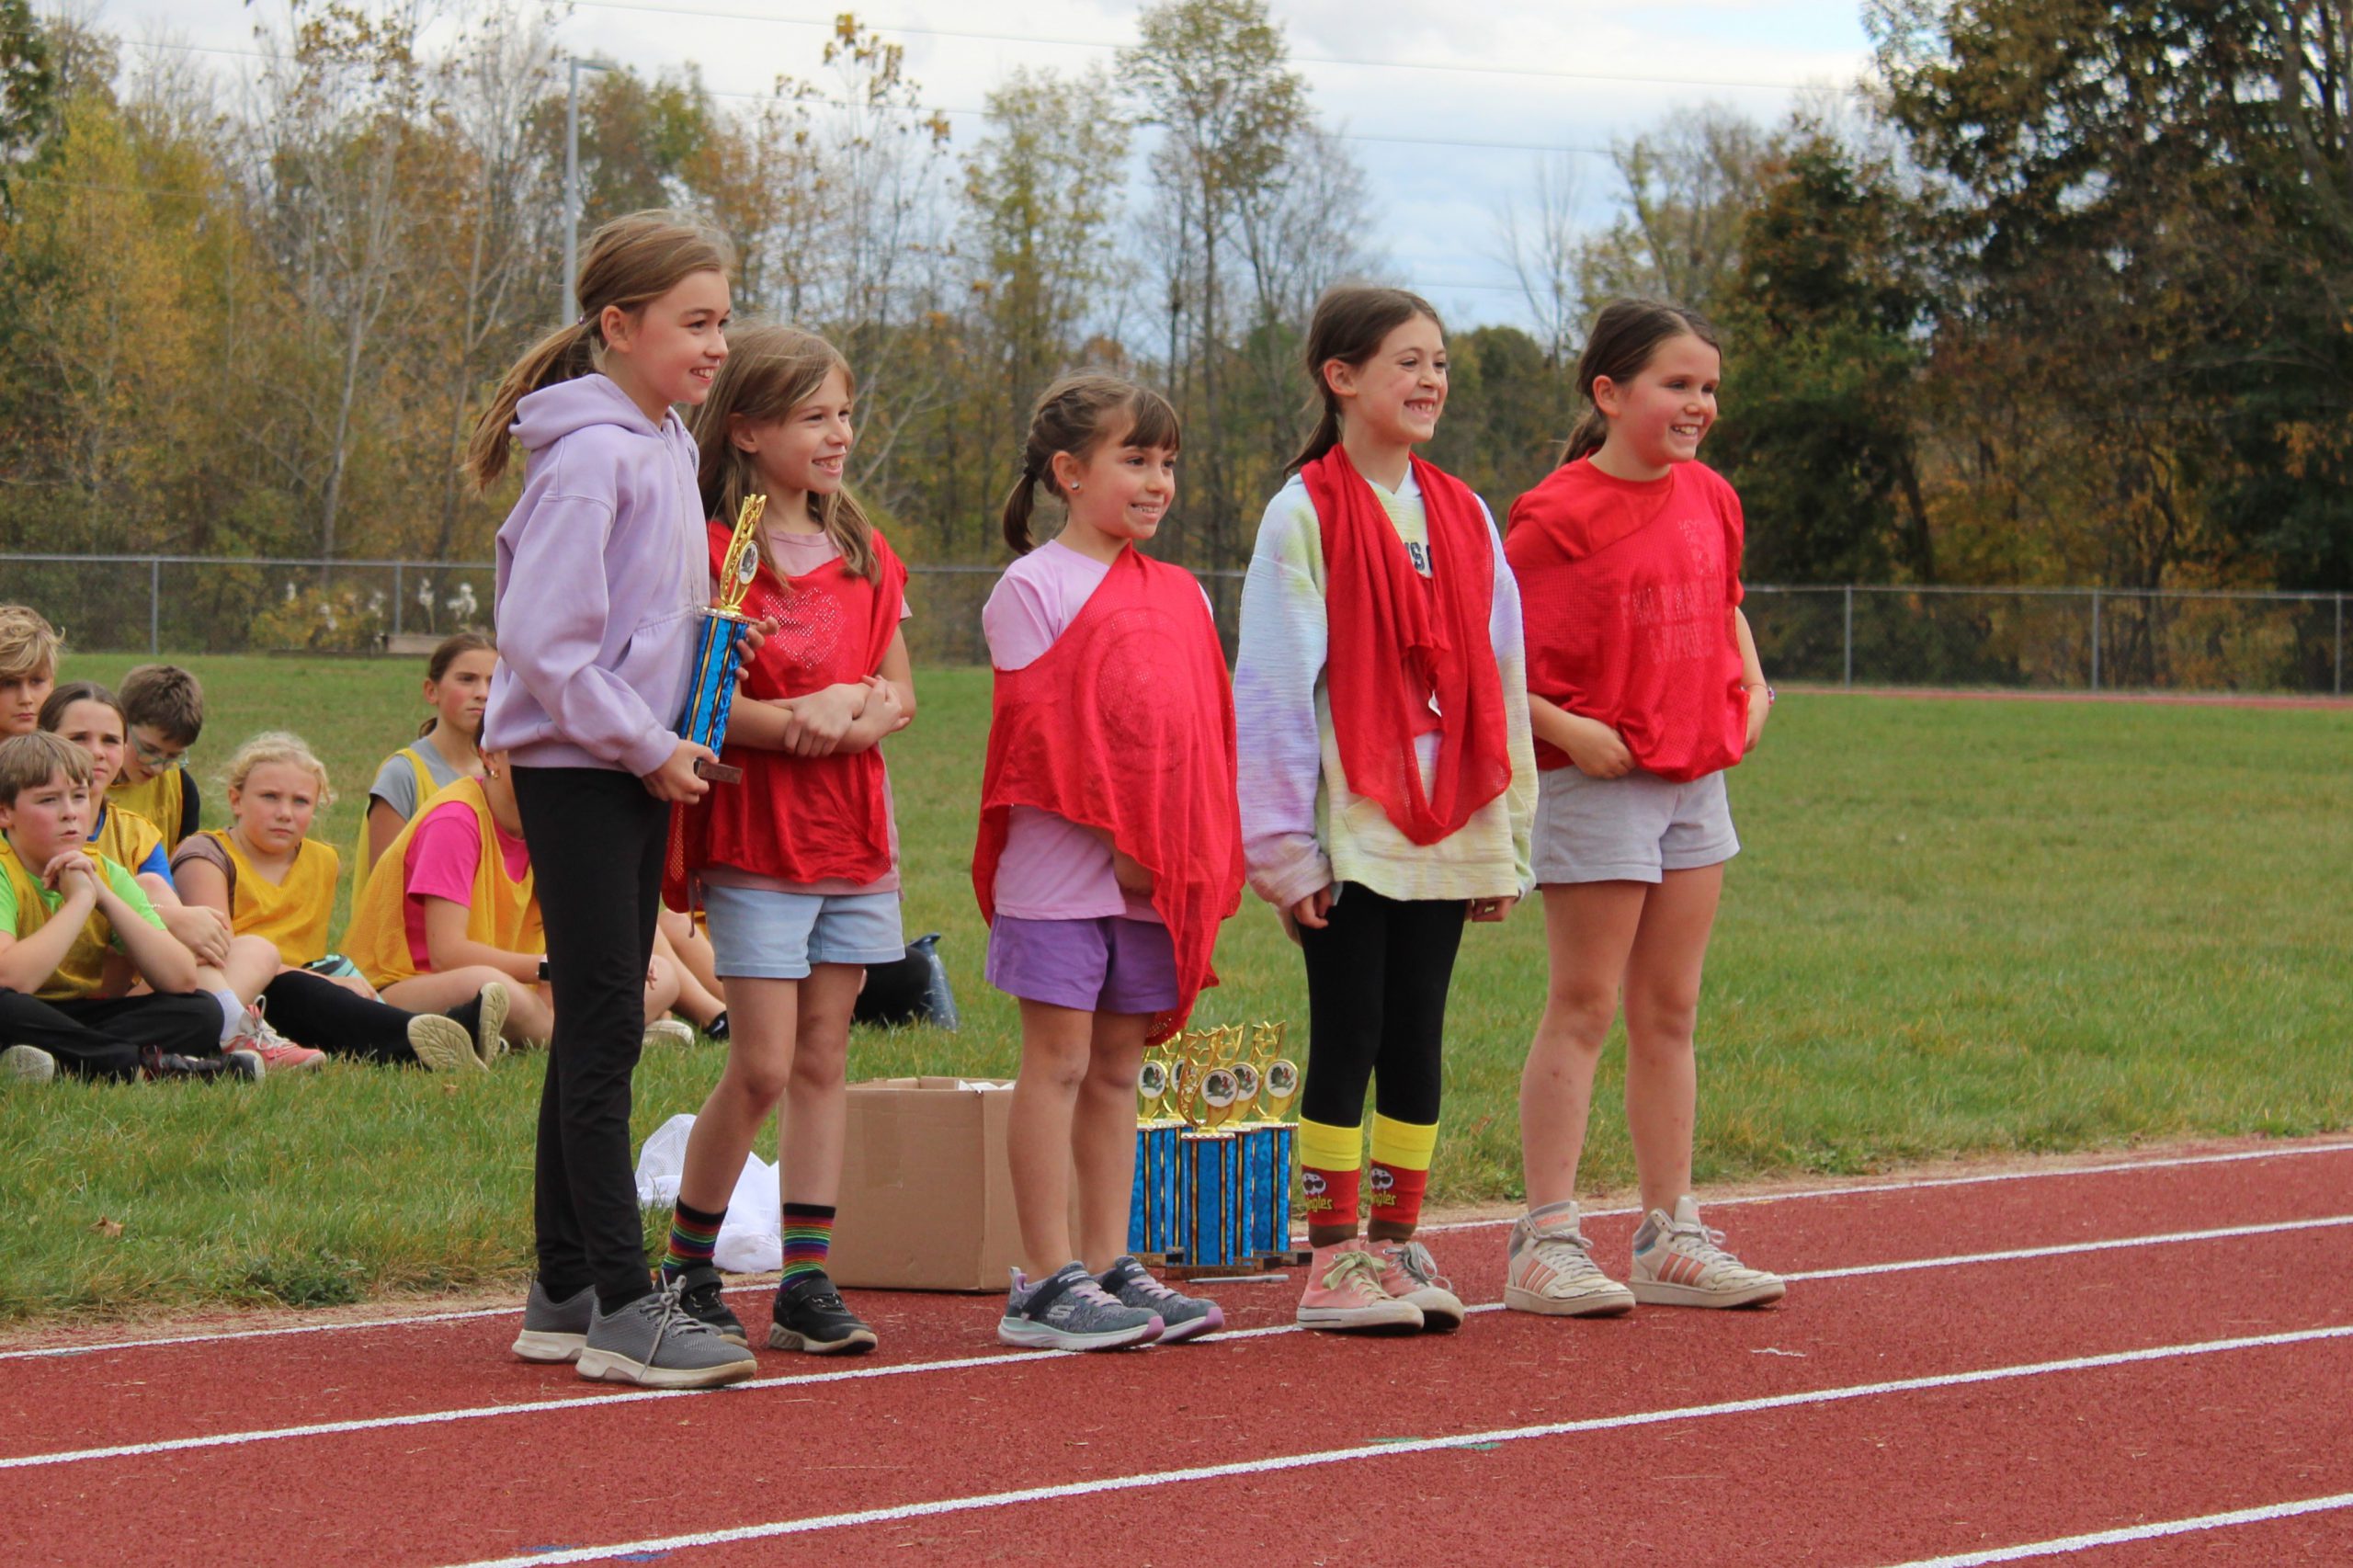 five students stand in a line and smile. one student holds a trophy